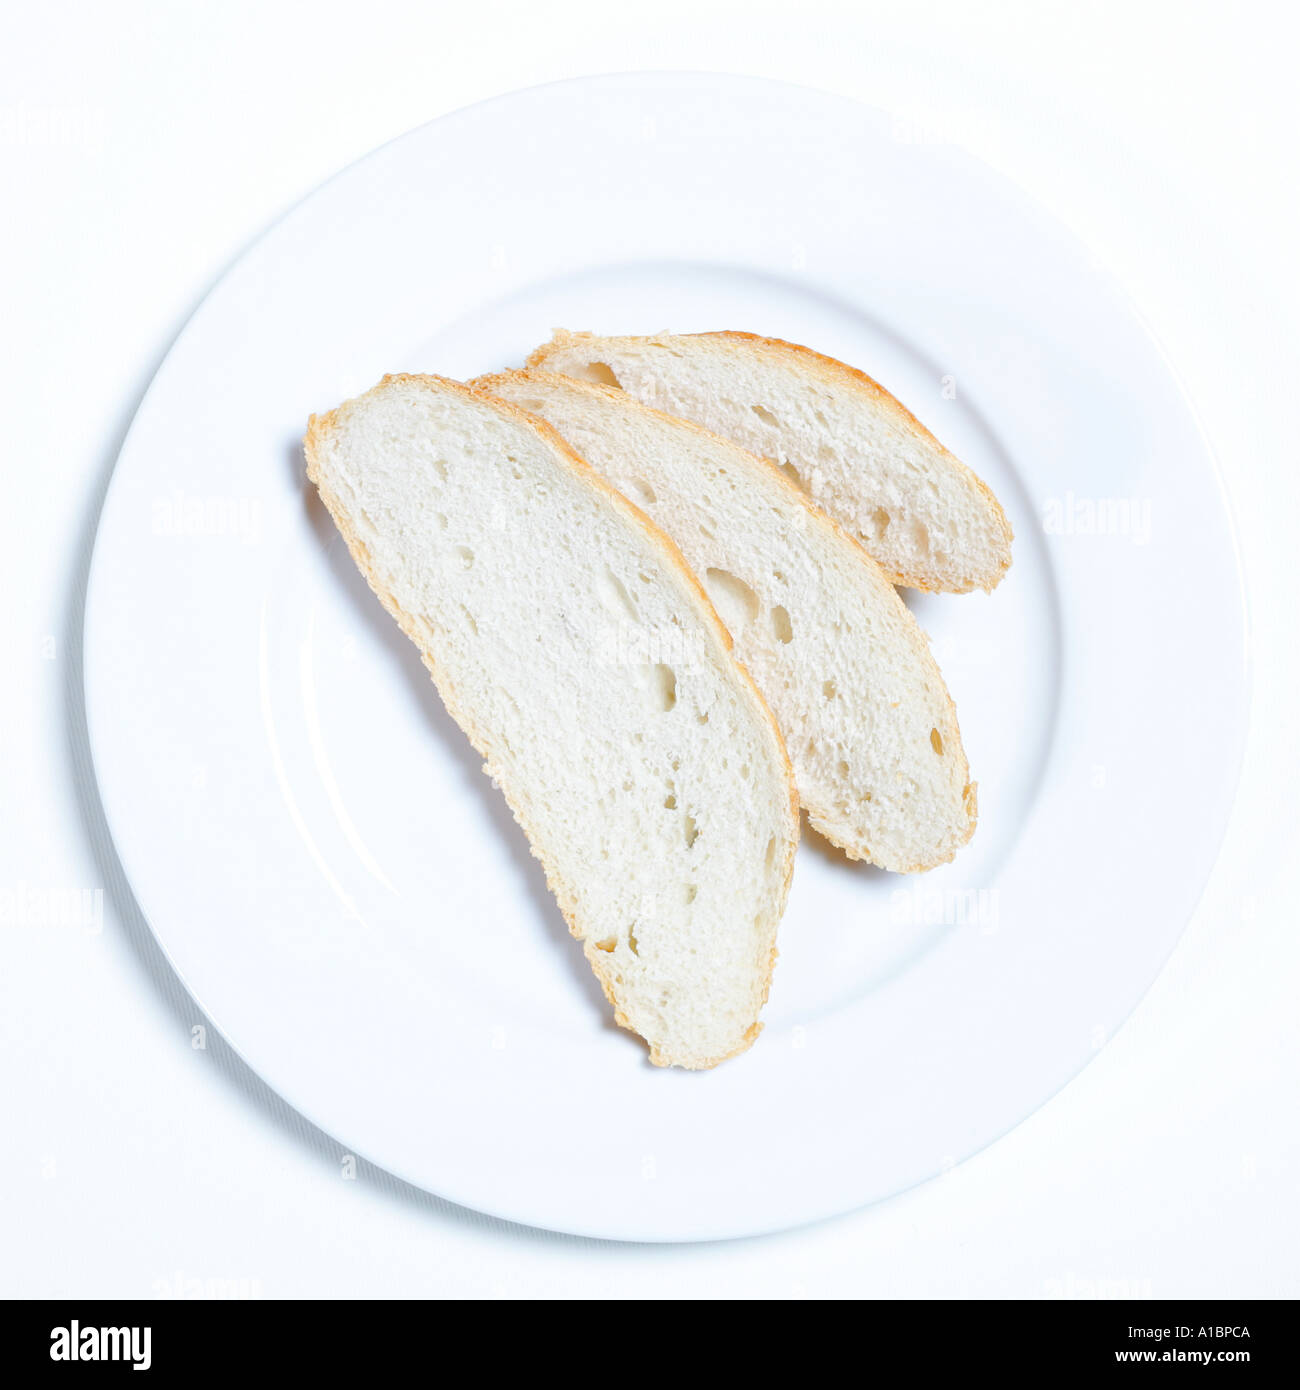 Slices of bread on plate Stock Photo